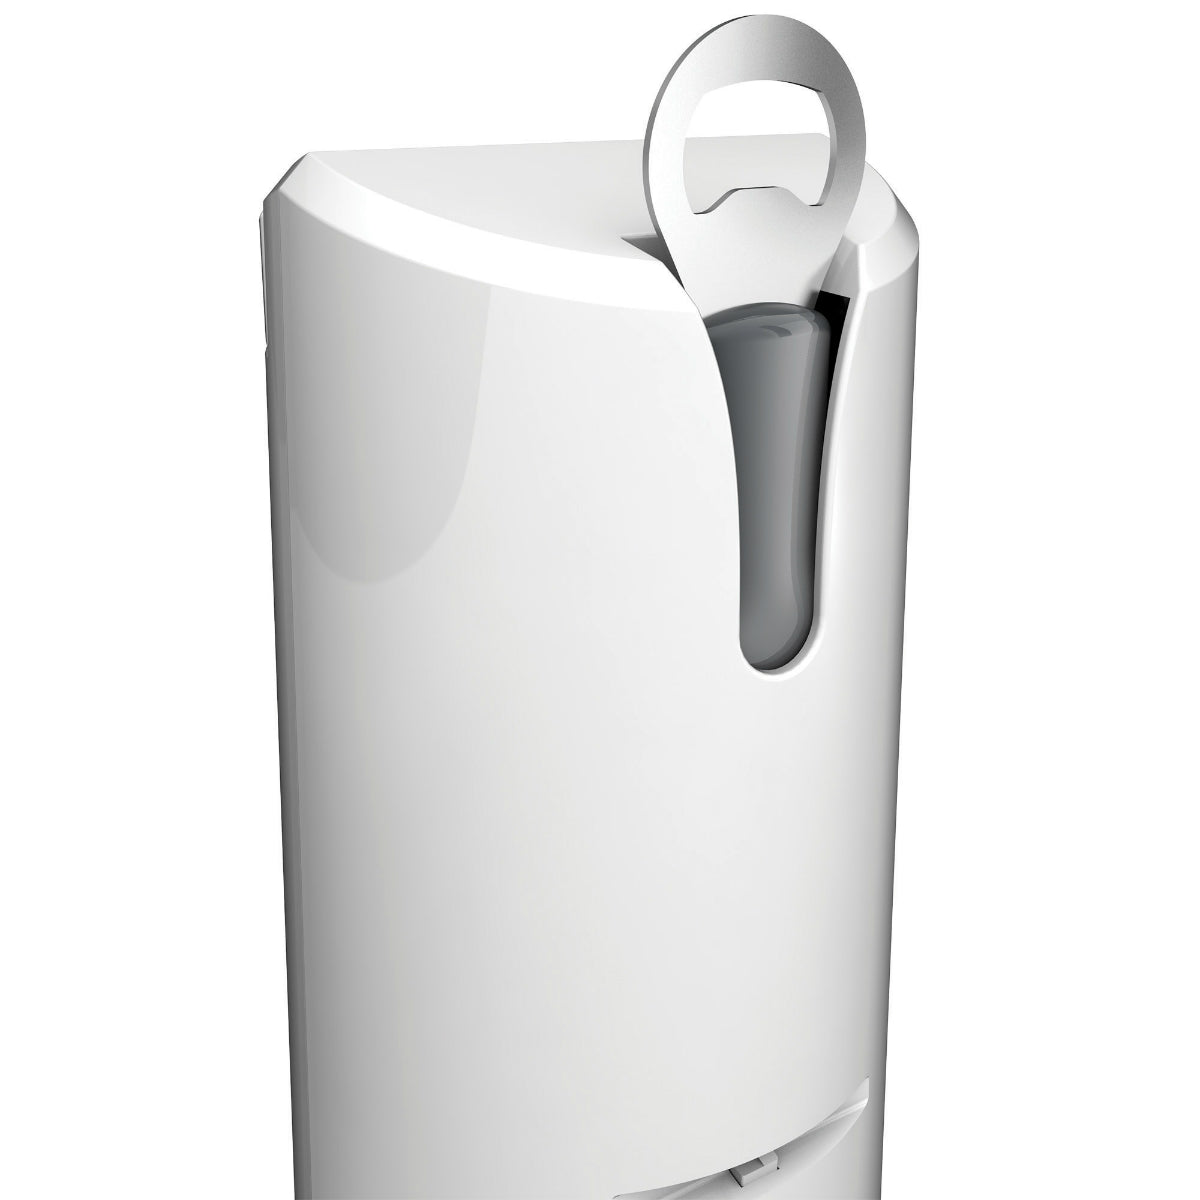 Hamilton Beach Extra-Tall Can Opener with Removable Cutting Lever,  Stainless Steel - 76700